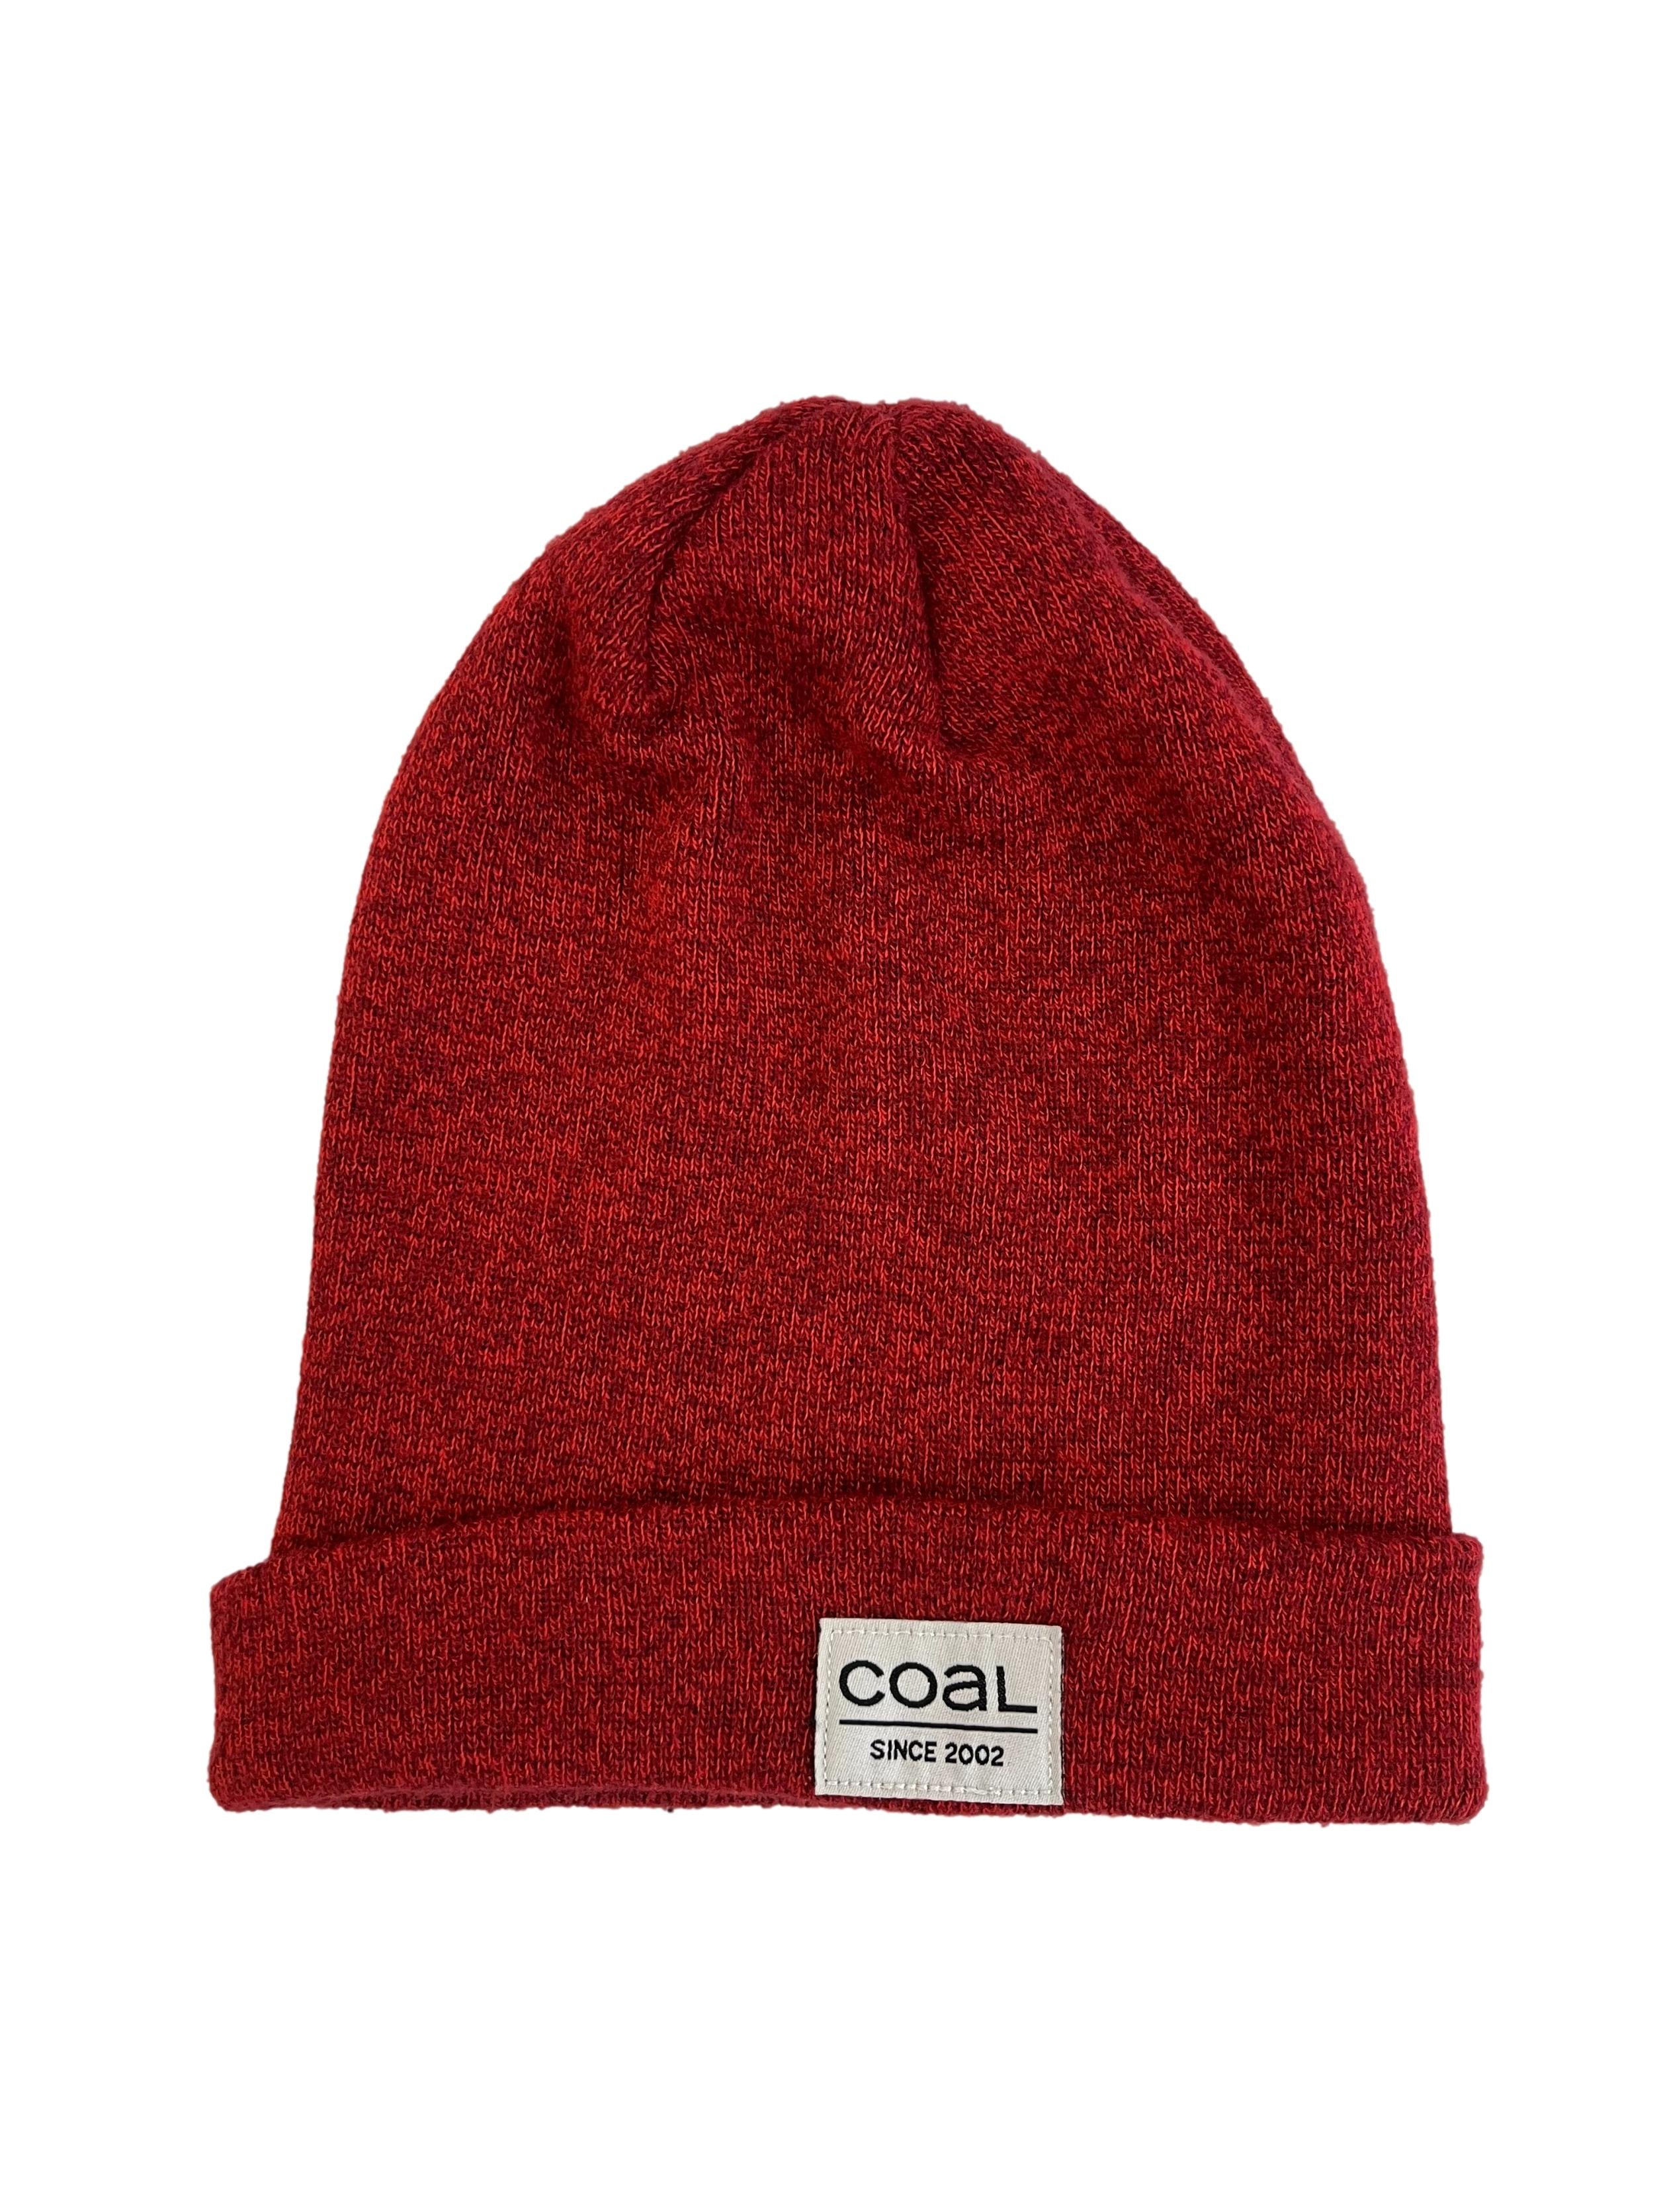 Fire Red Knitted Beanie